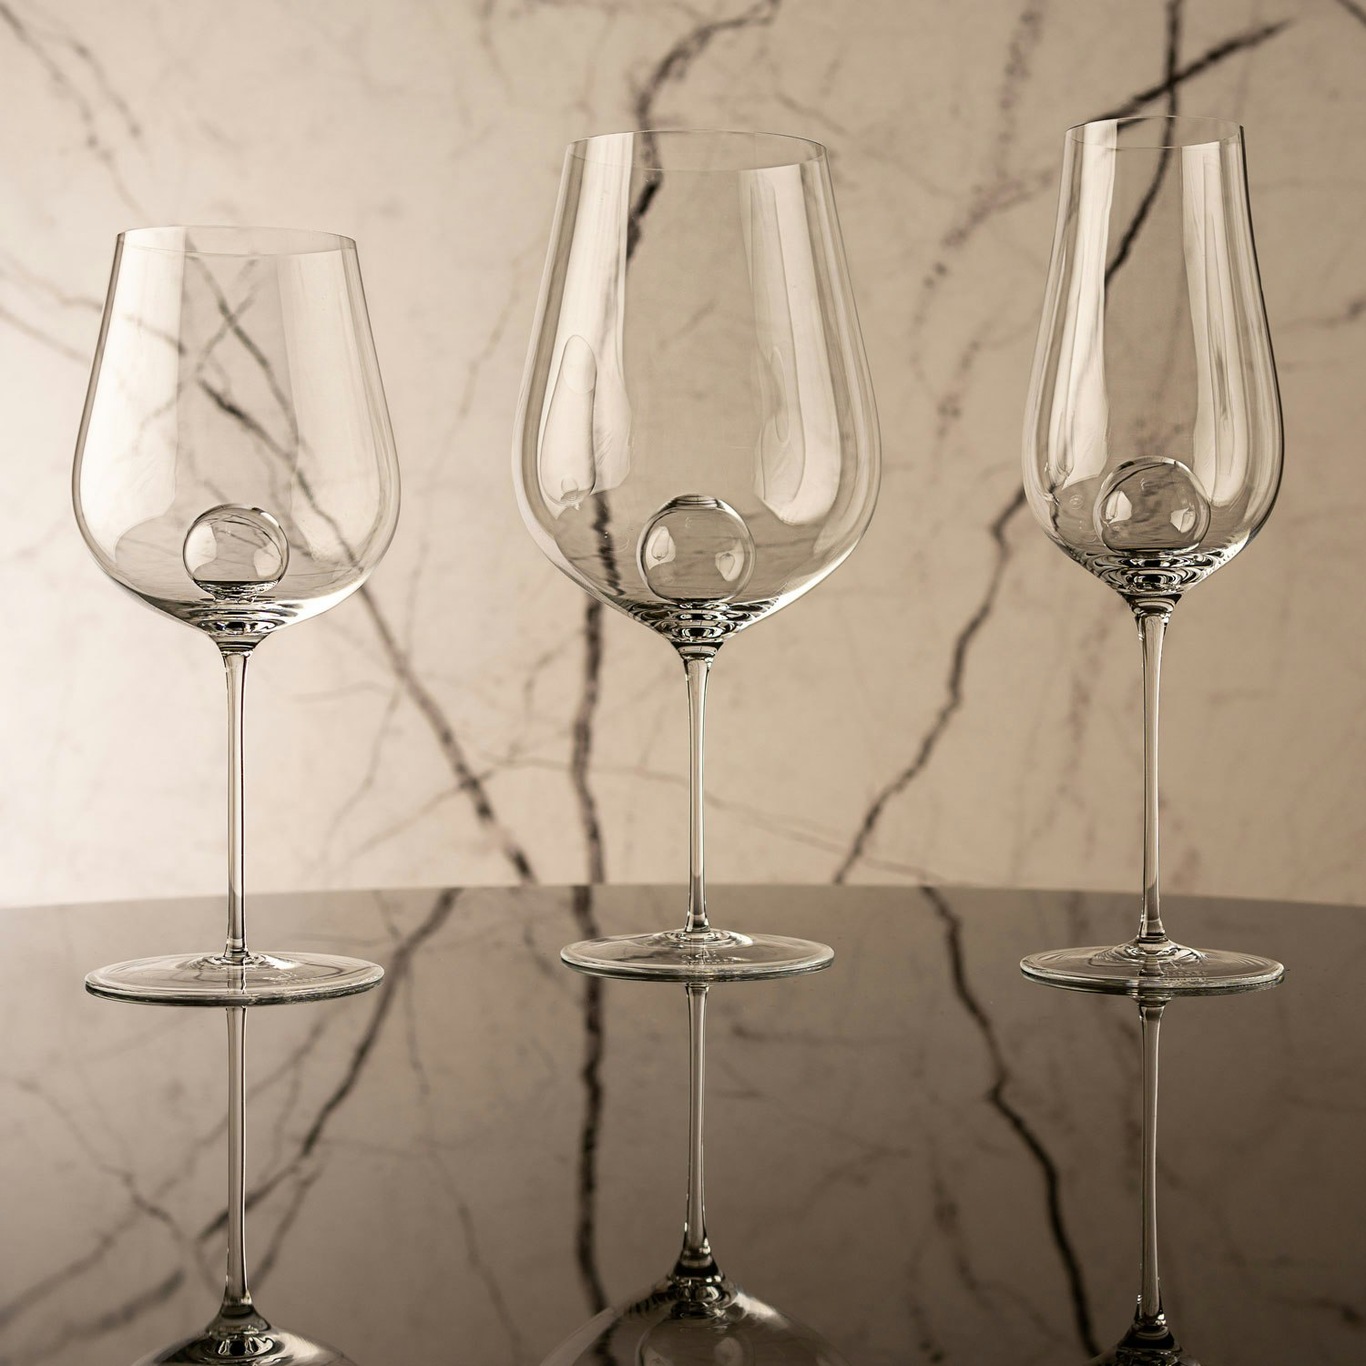 Zwiesel Prizma Water Glass 37 CL 4-Pack - Drinking Glasses Crystal Glass Clear - 46208428